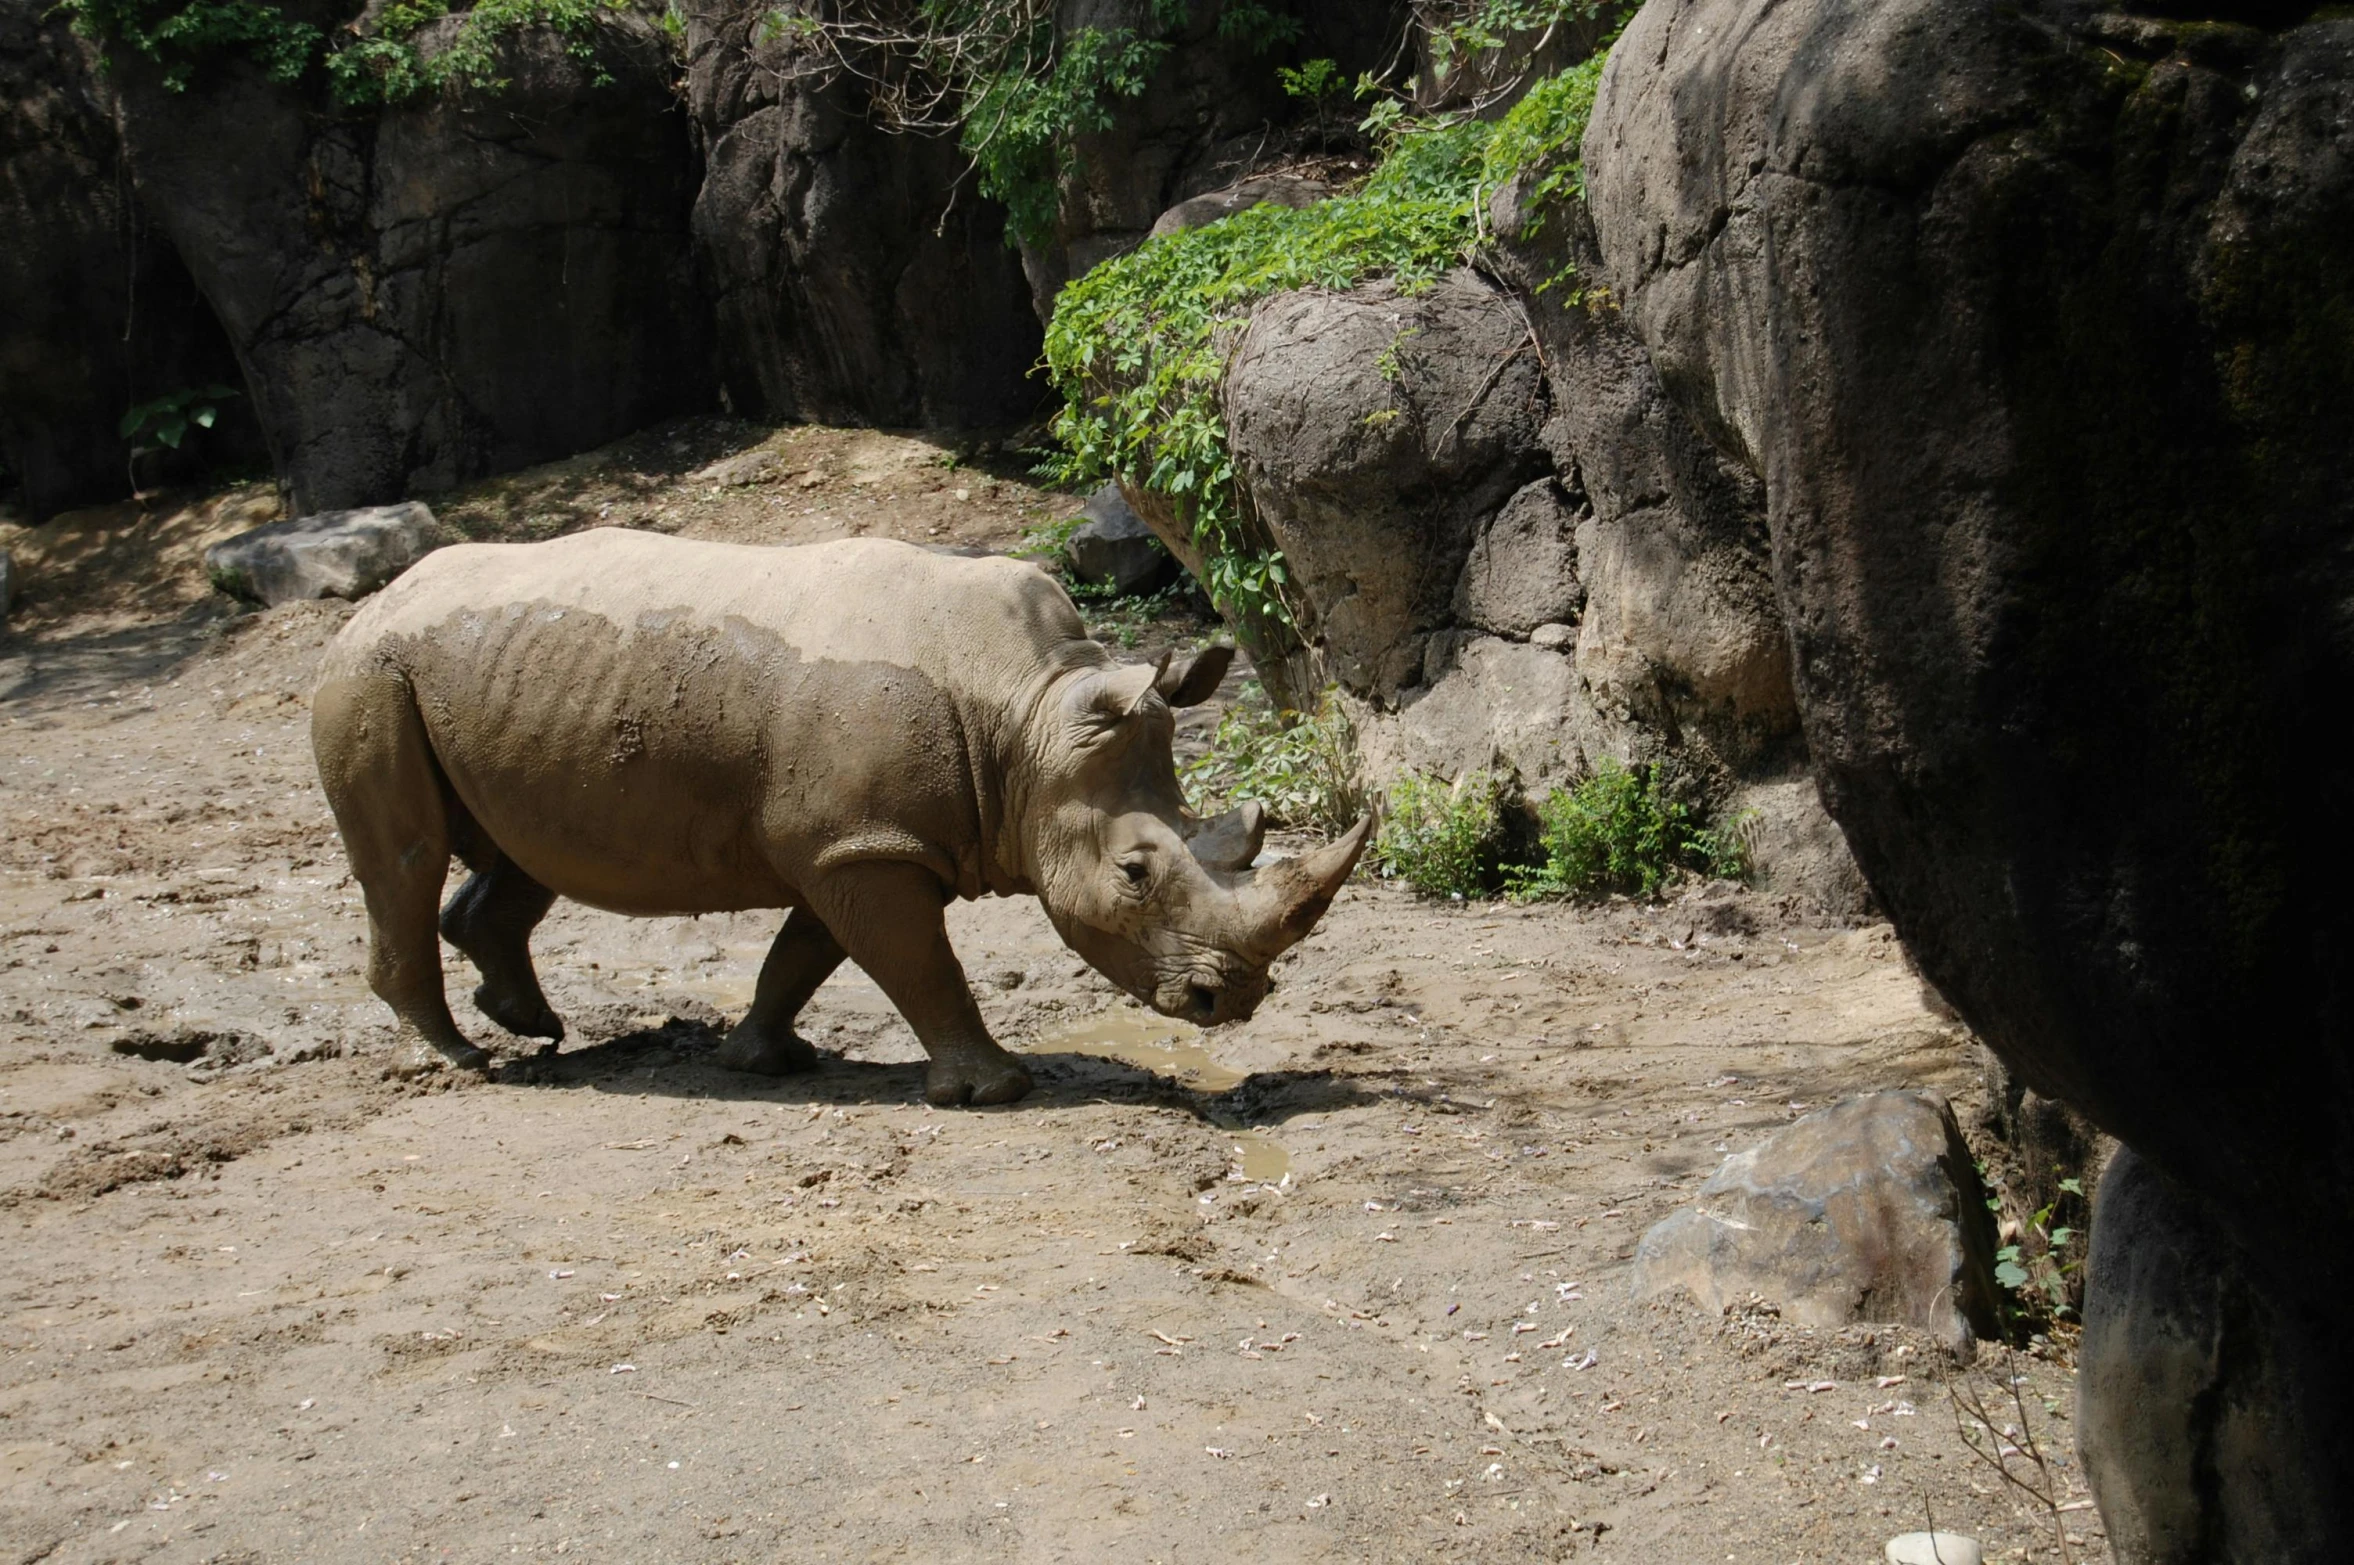 an animal standing in a dirt field next to large boulders